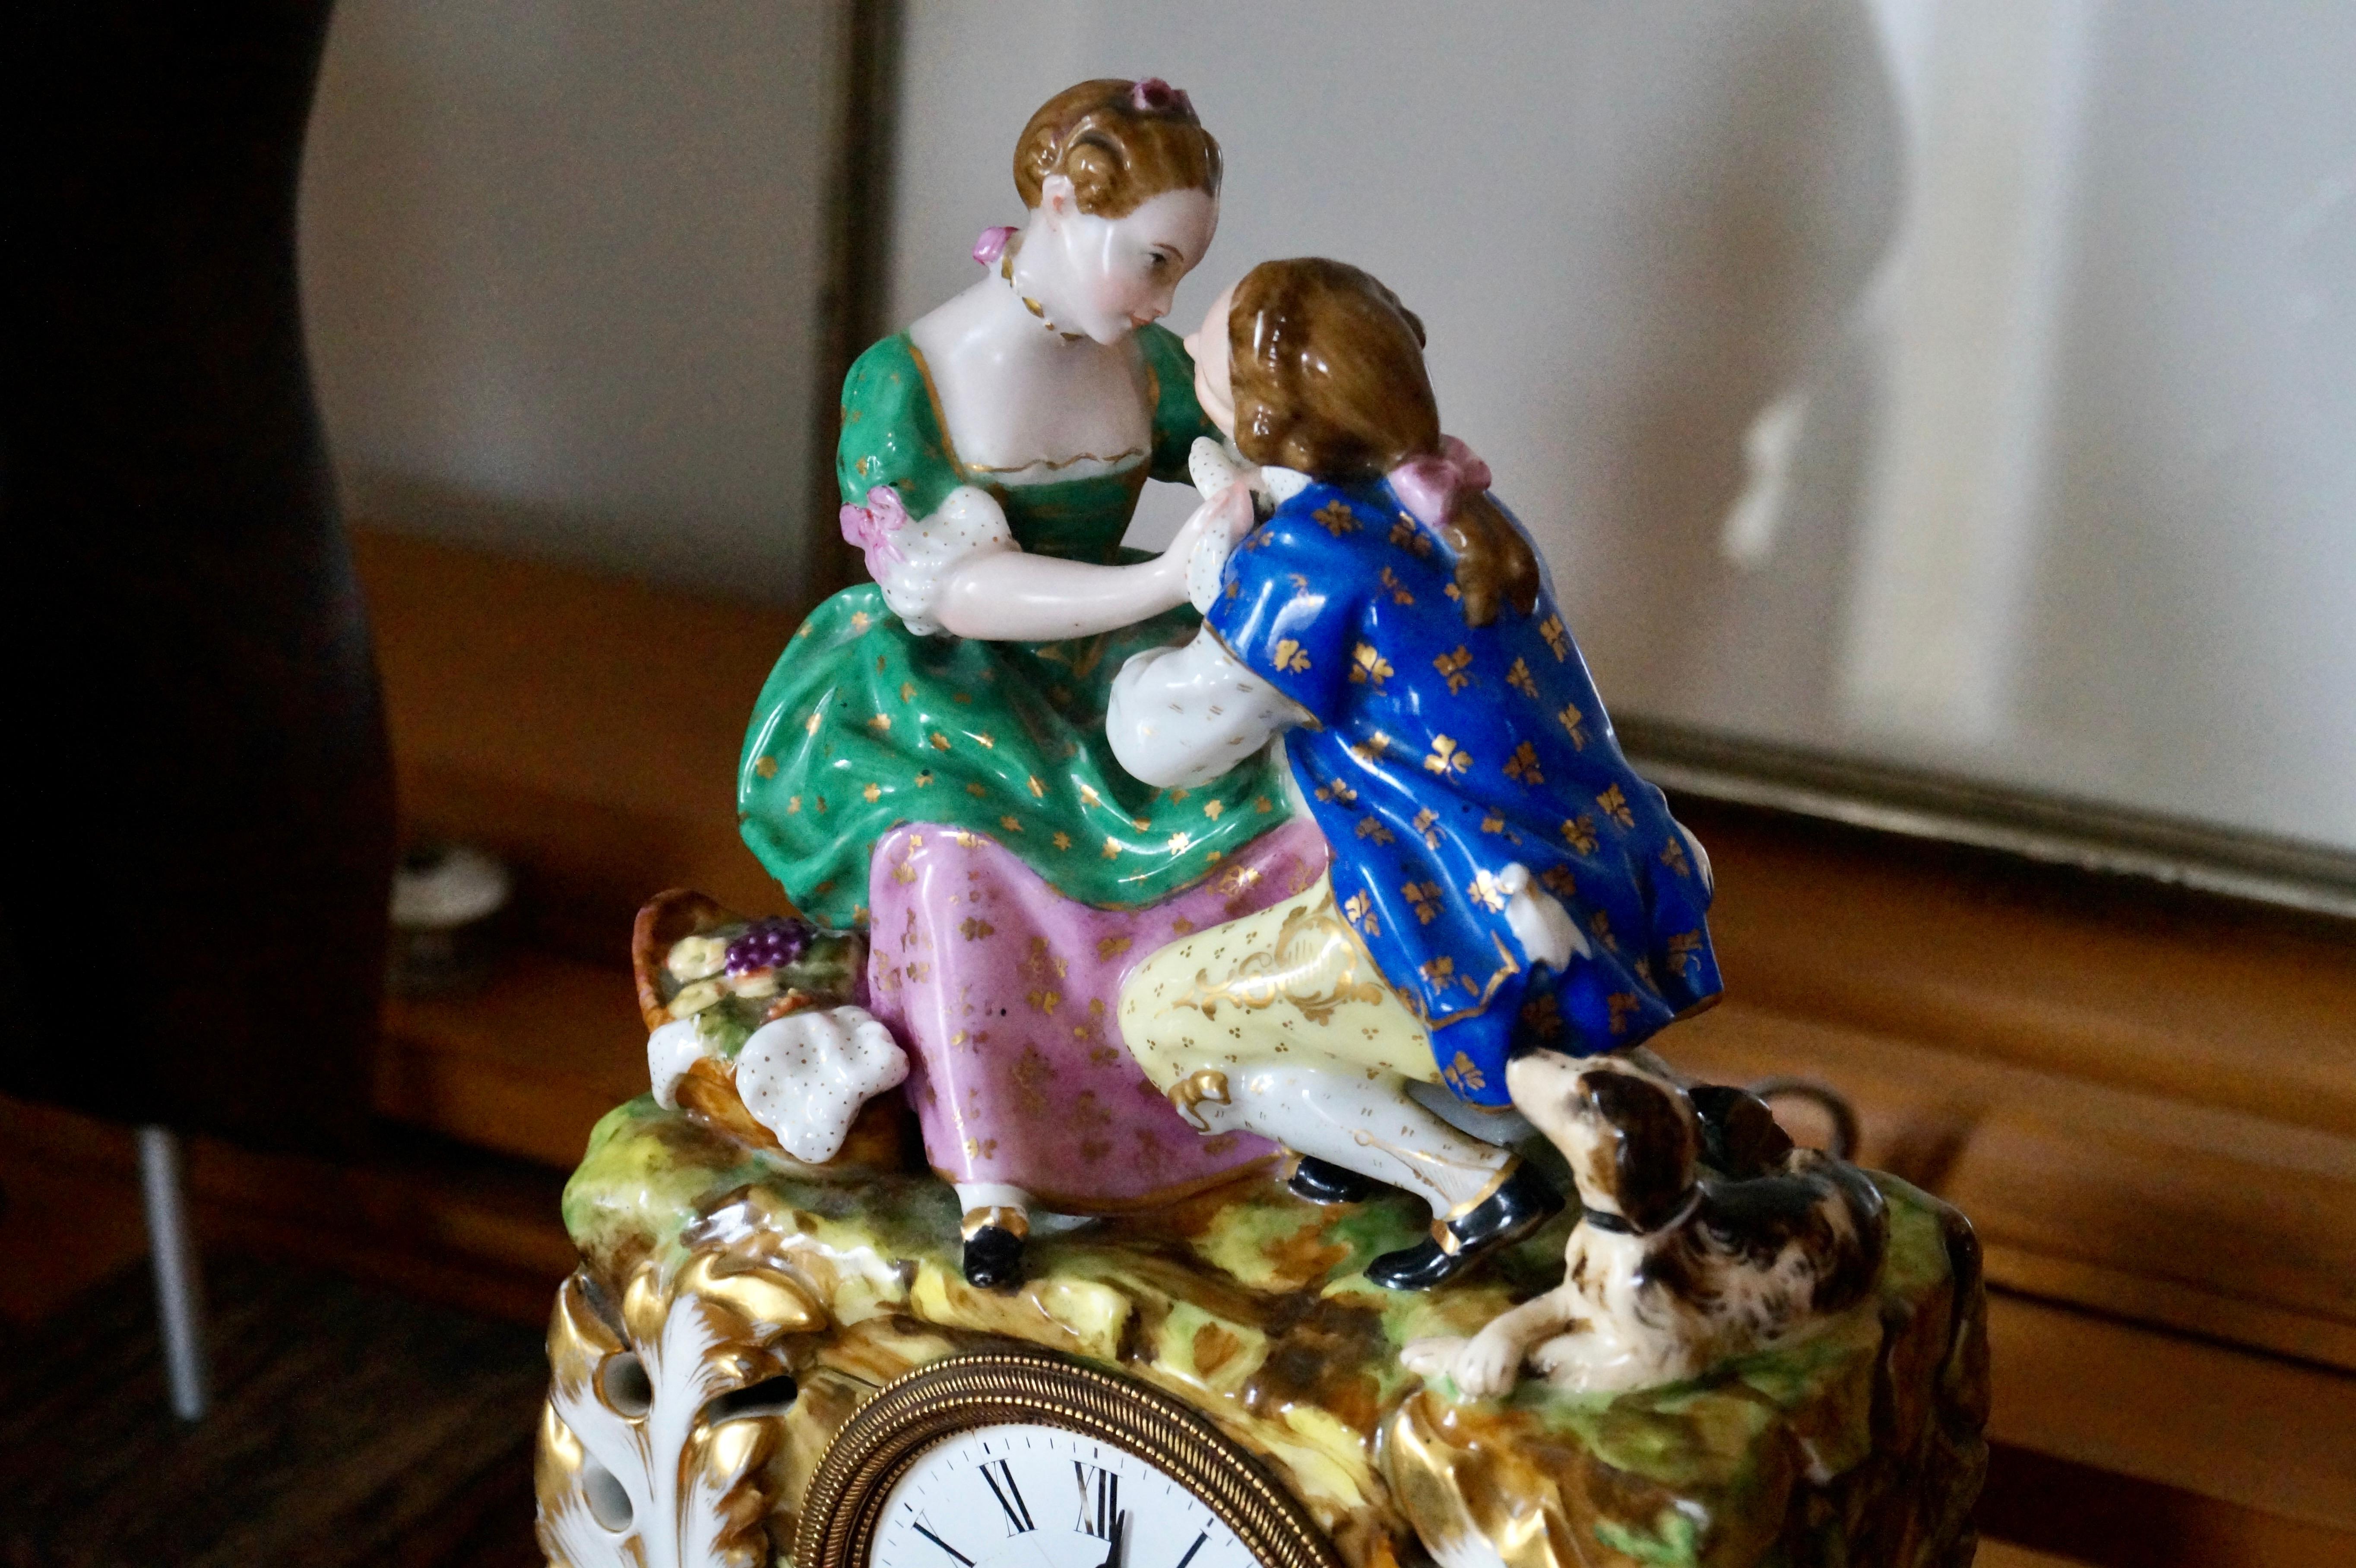 Beautiful antique clock of French Old Paris Porcelain (Porcelaine de Paris)

This clock is completely made of 1 pieces of porcelain with a couple in love, a dog and basket with fruit and flowers. The foot is hand painted with burgundy red and richly